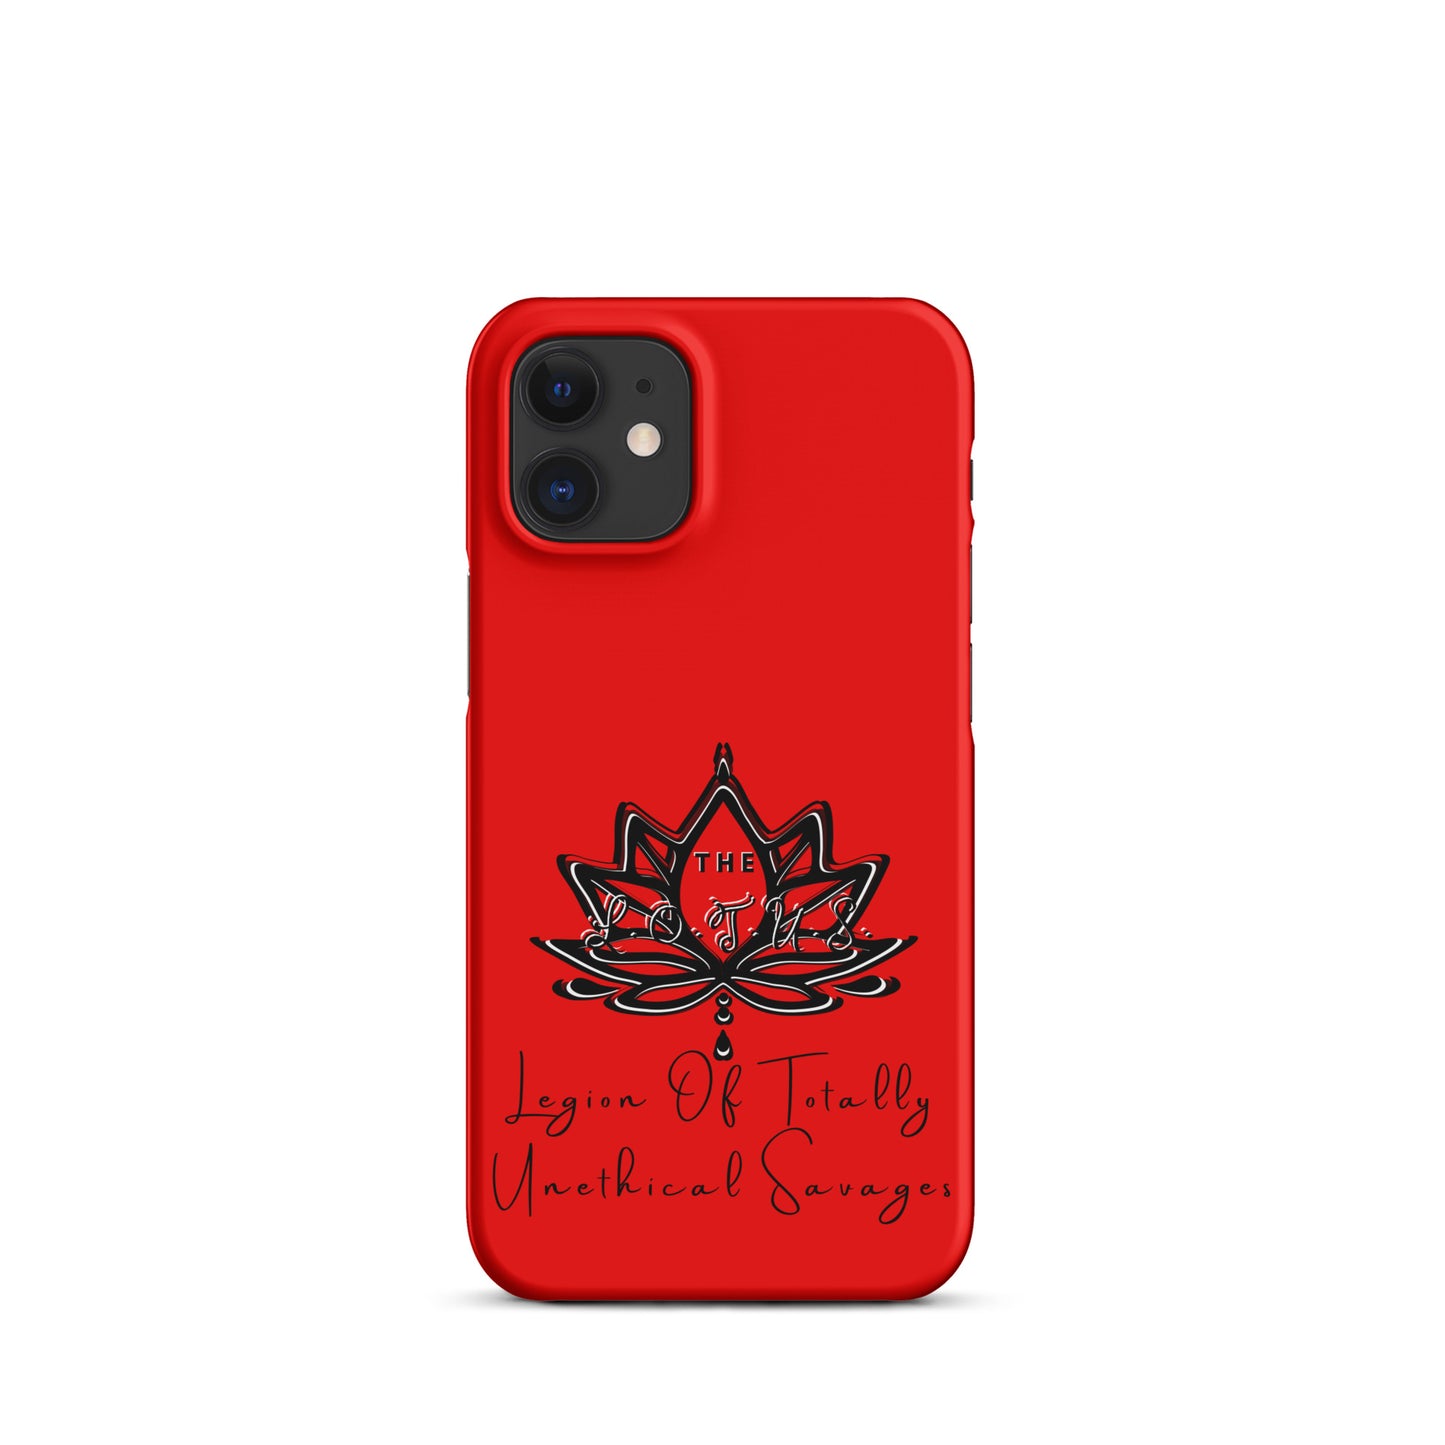 'The LOTUS' Full Logo 2 - Red Snap case for iPhone®